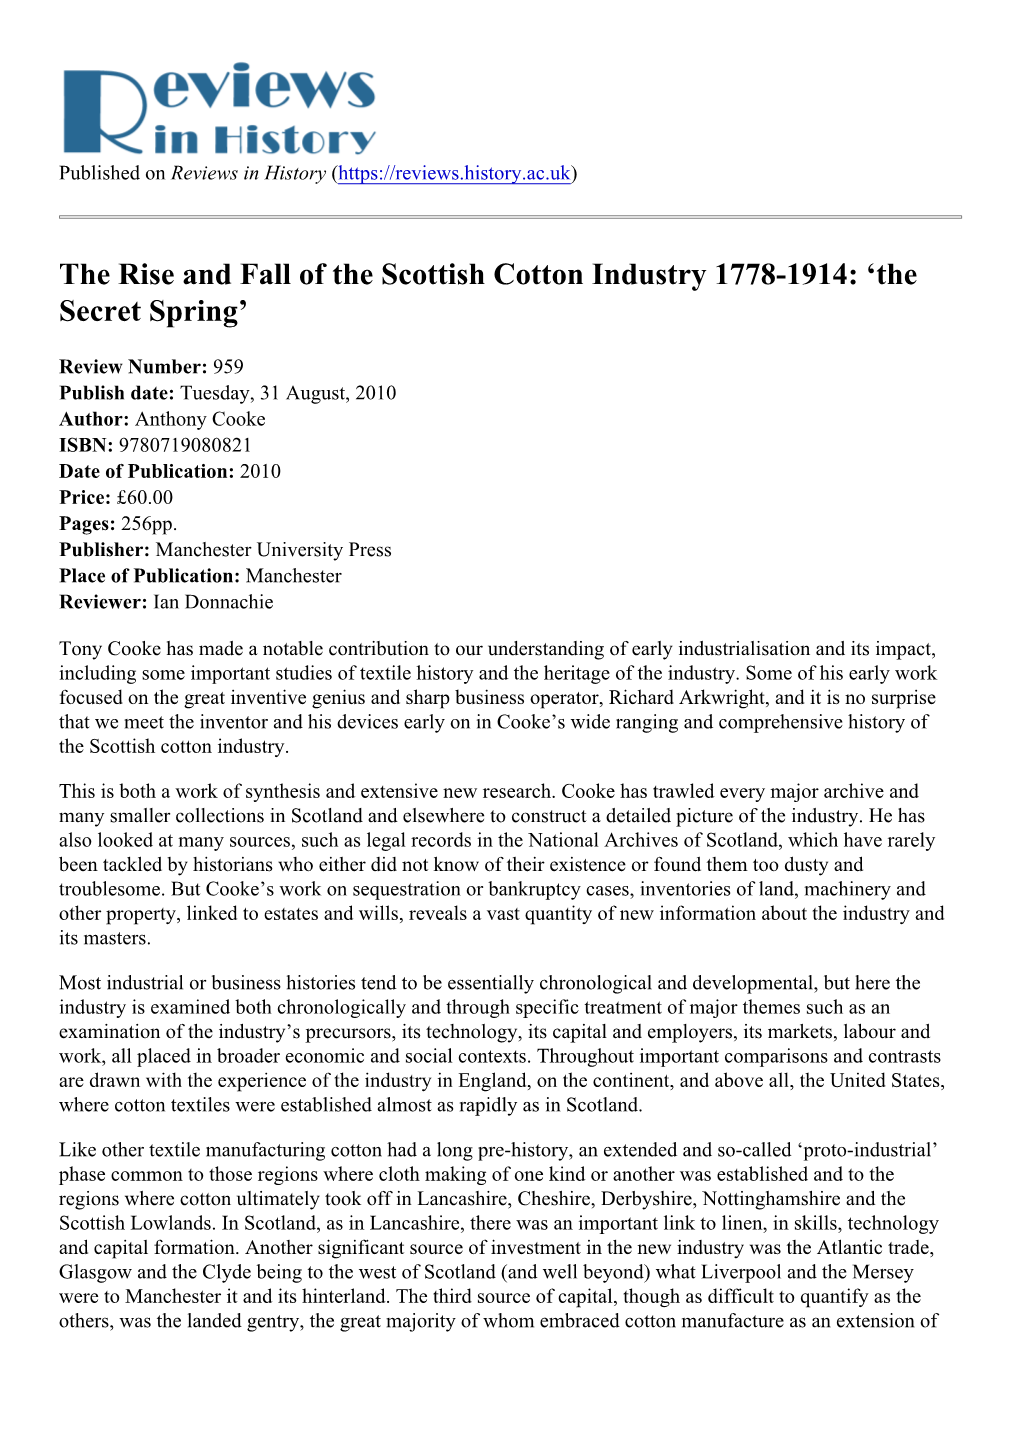 The Rise and Fall of the Scottish Cotton Industry 1778-1914: ‘The Secret Spring’